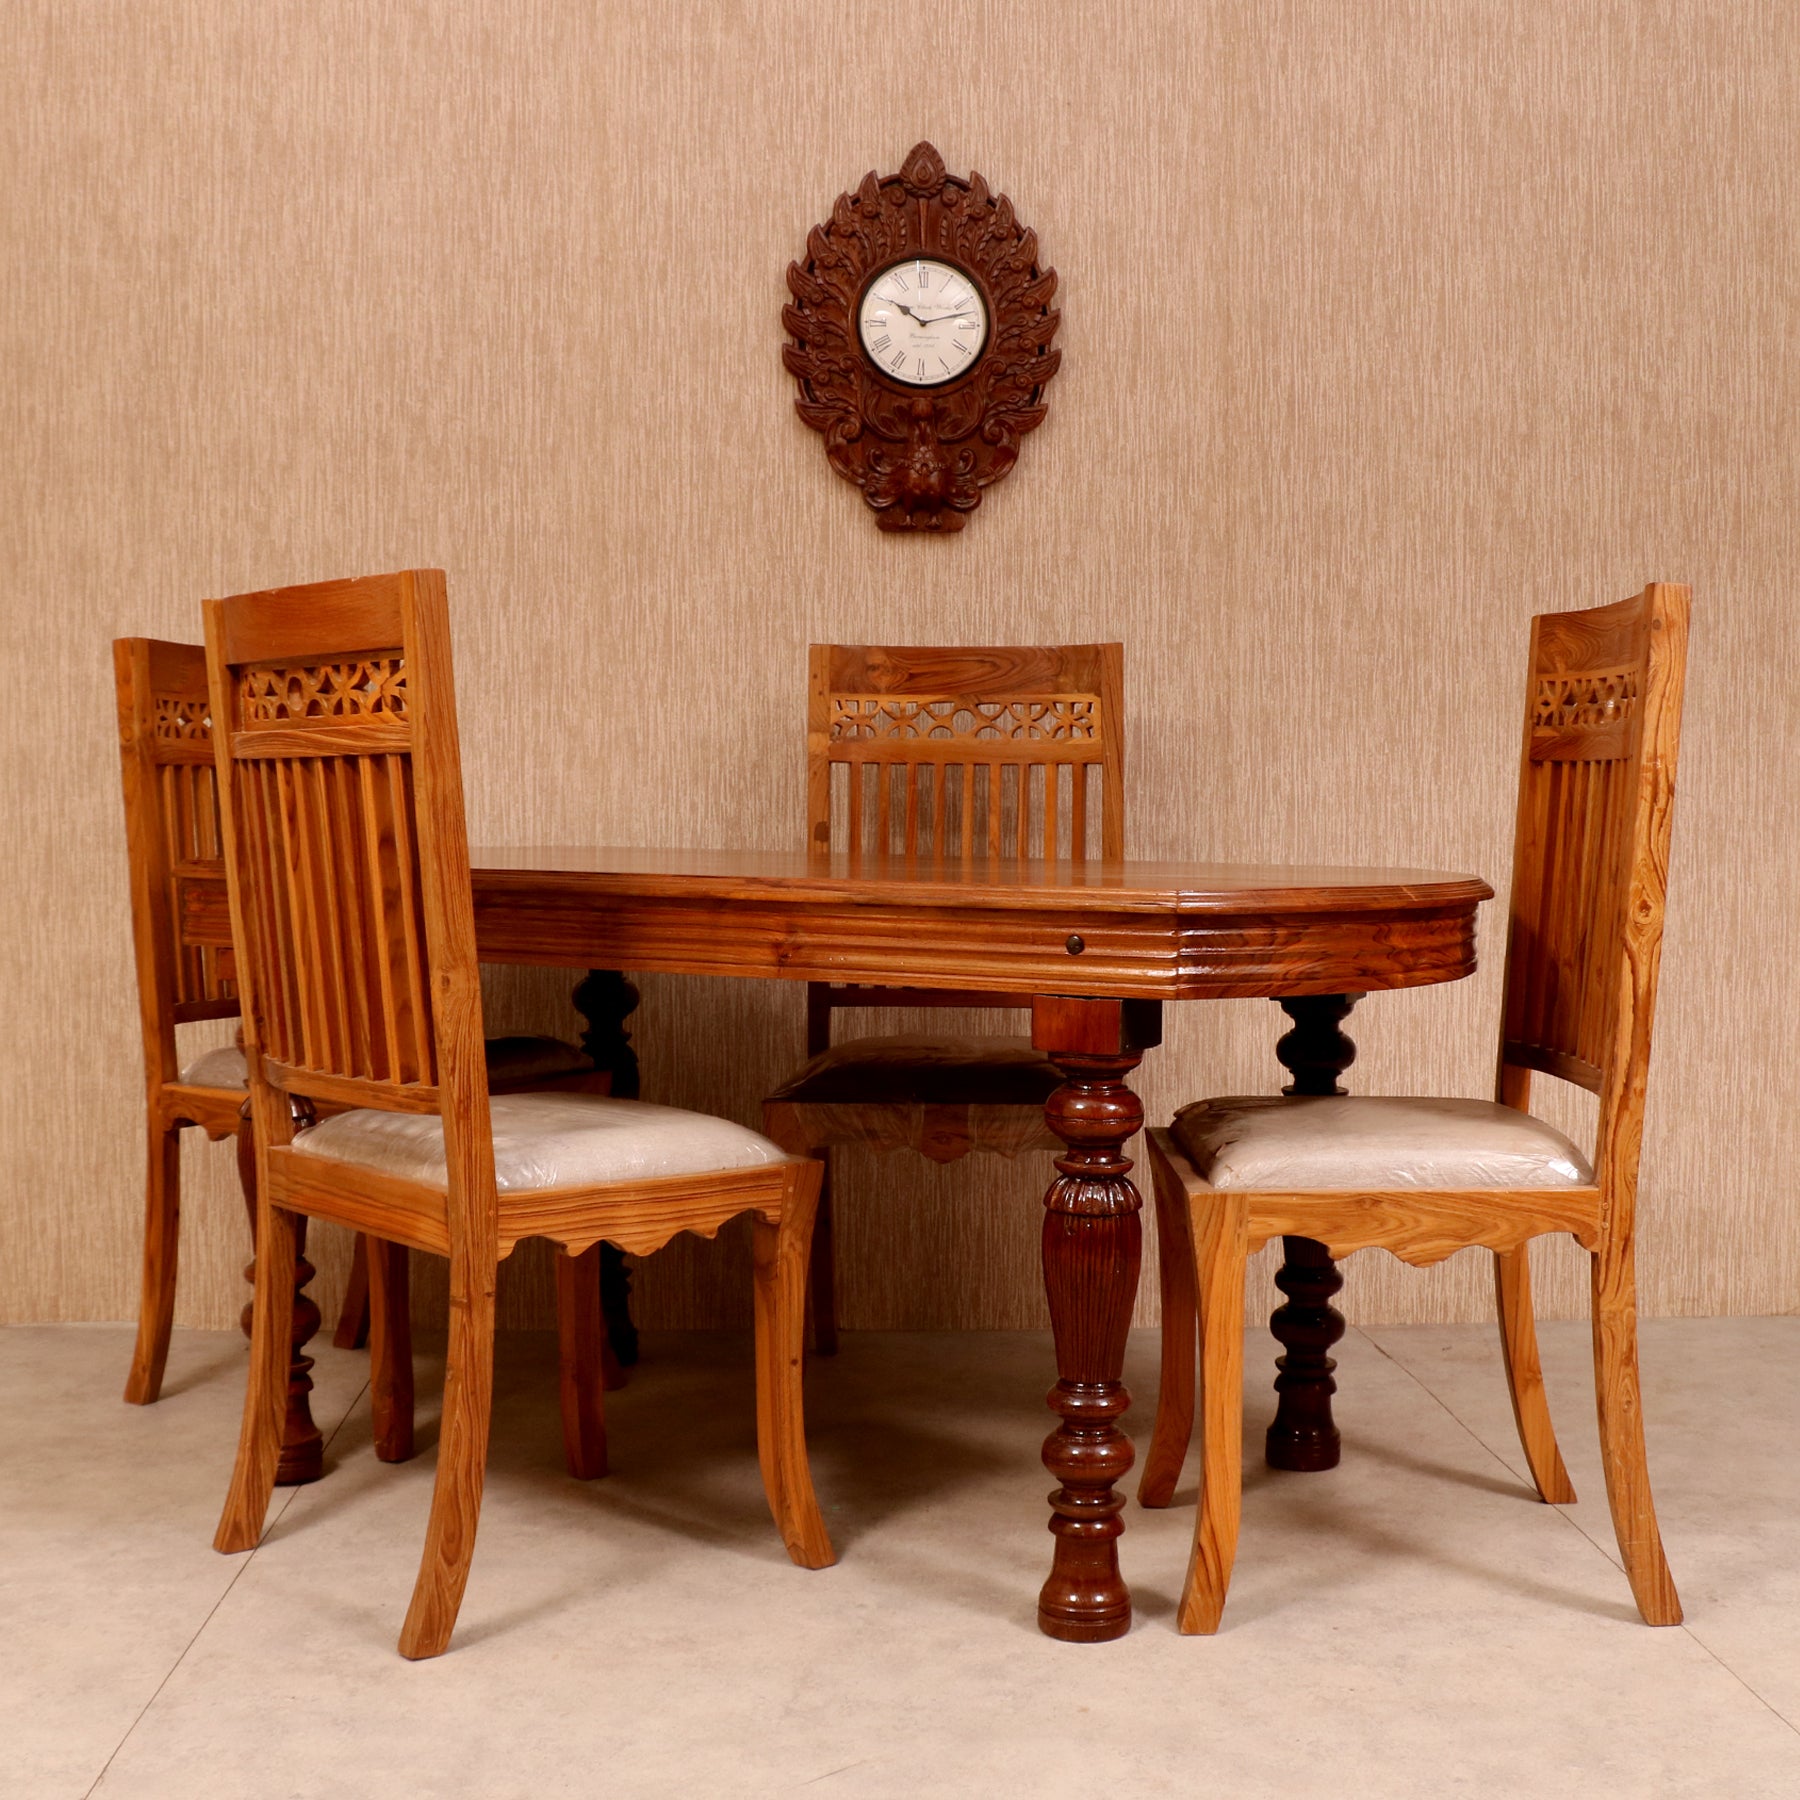 Classic Everyday Dining 4 Seater Set Dining Set